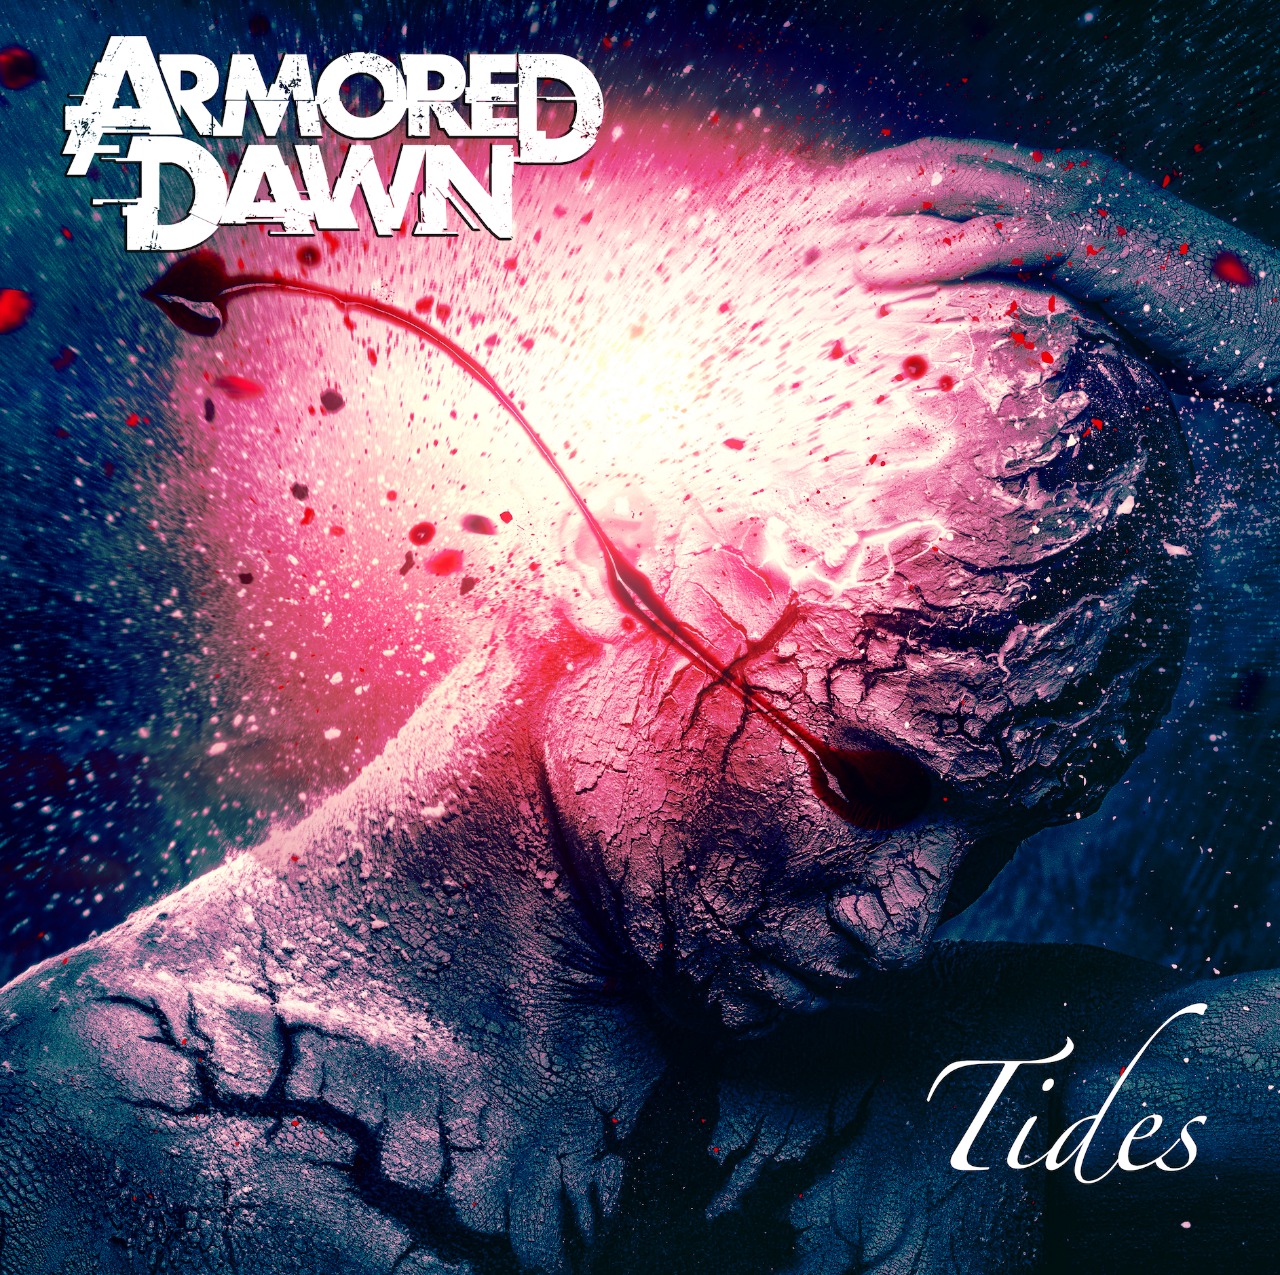 “Find a concept, work with the right partners and invest in the potential to pursue your dreams” say ‘Armored Dawn’ as they unleash ‘Tides’.